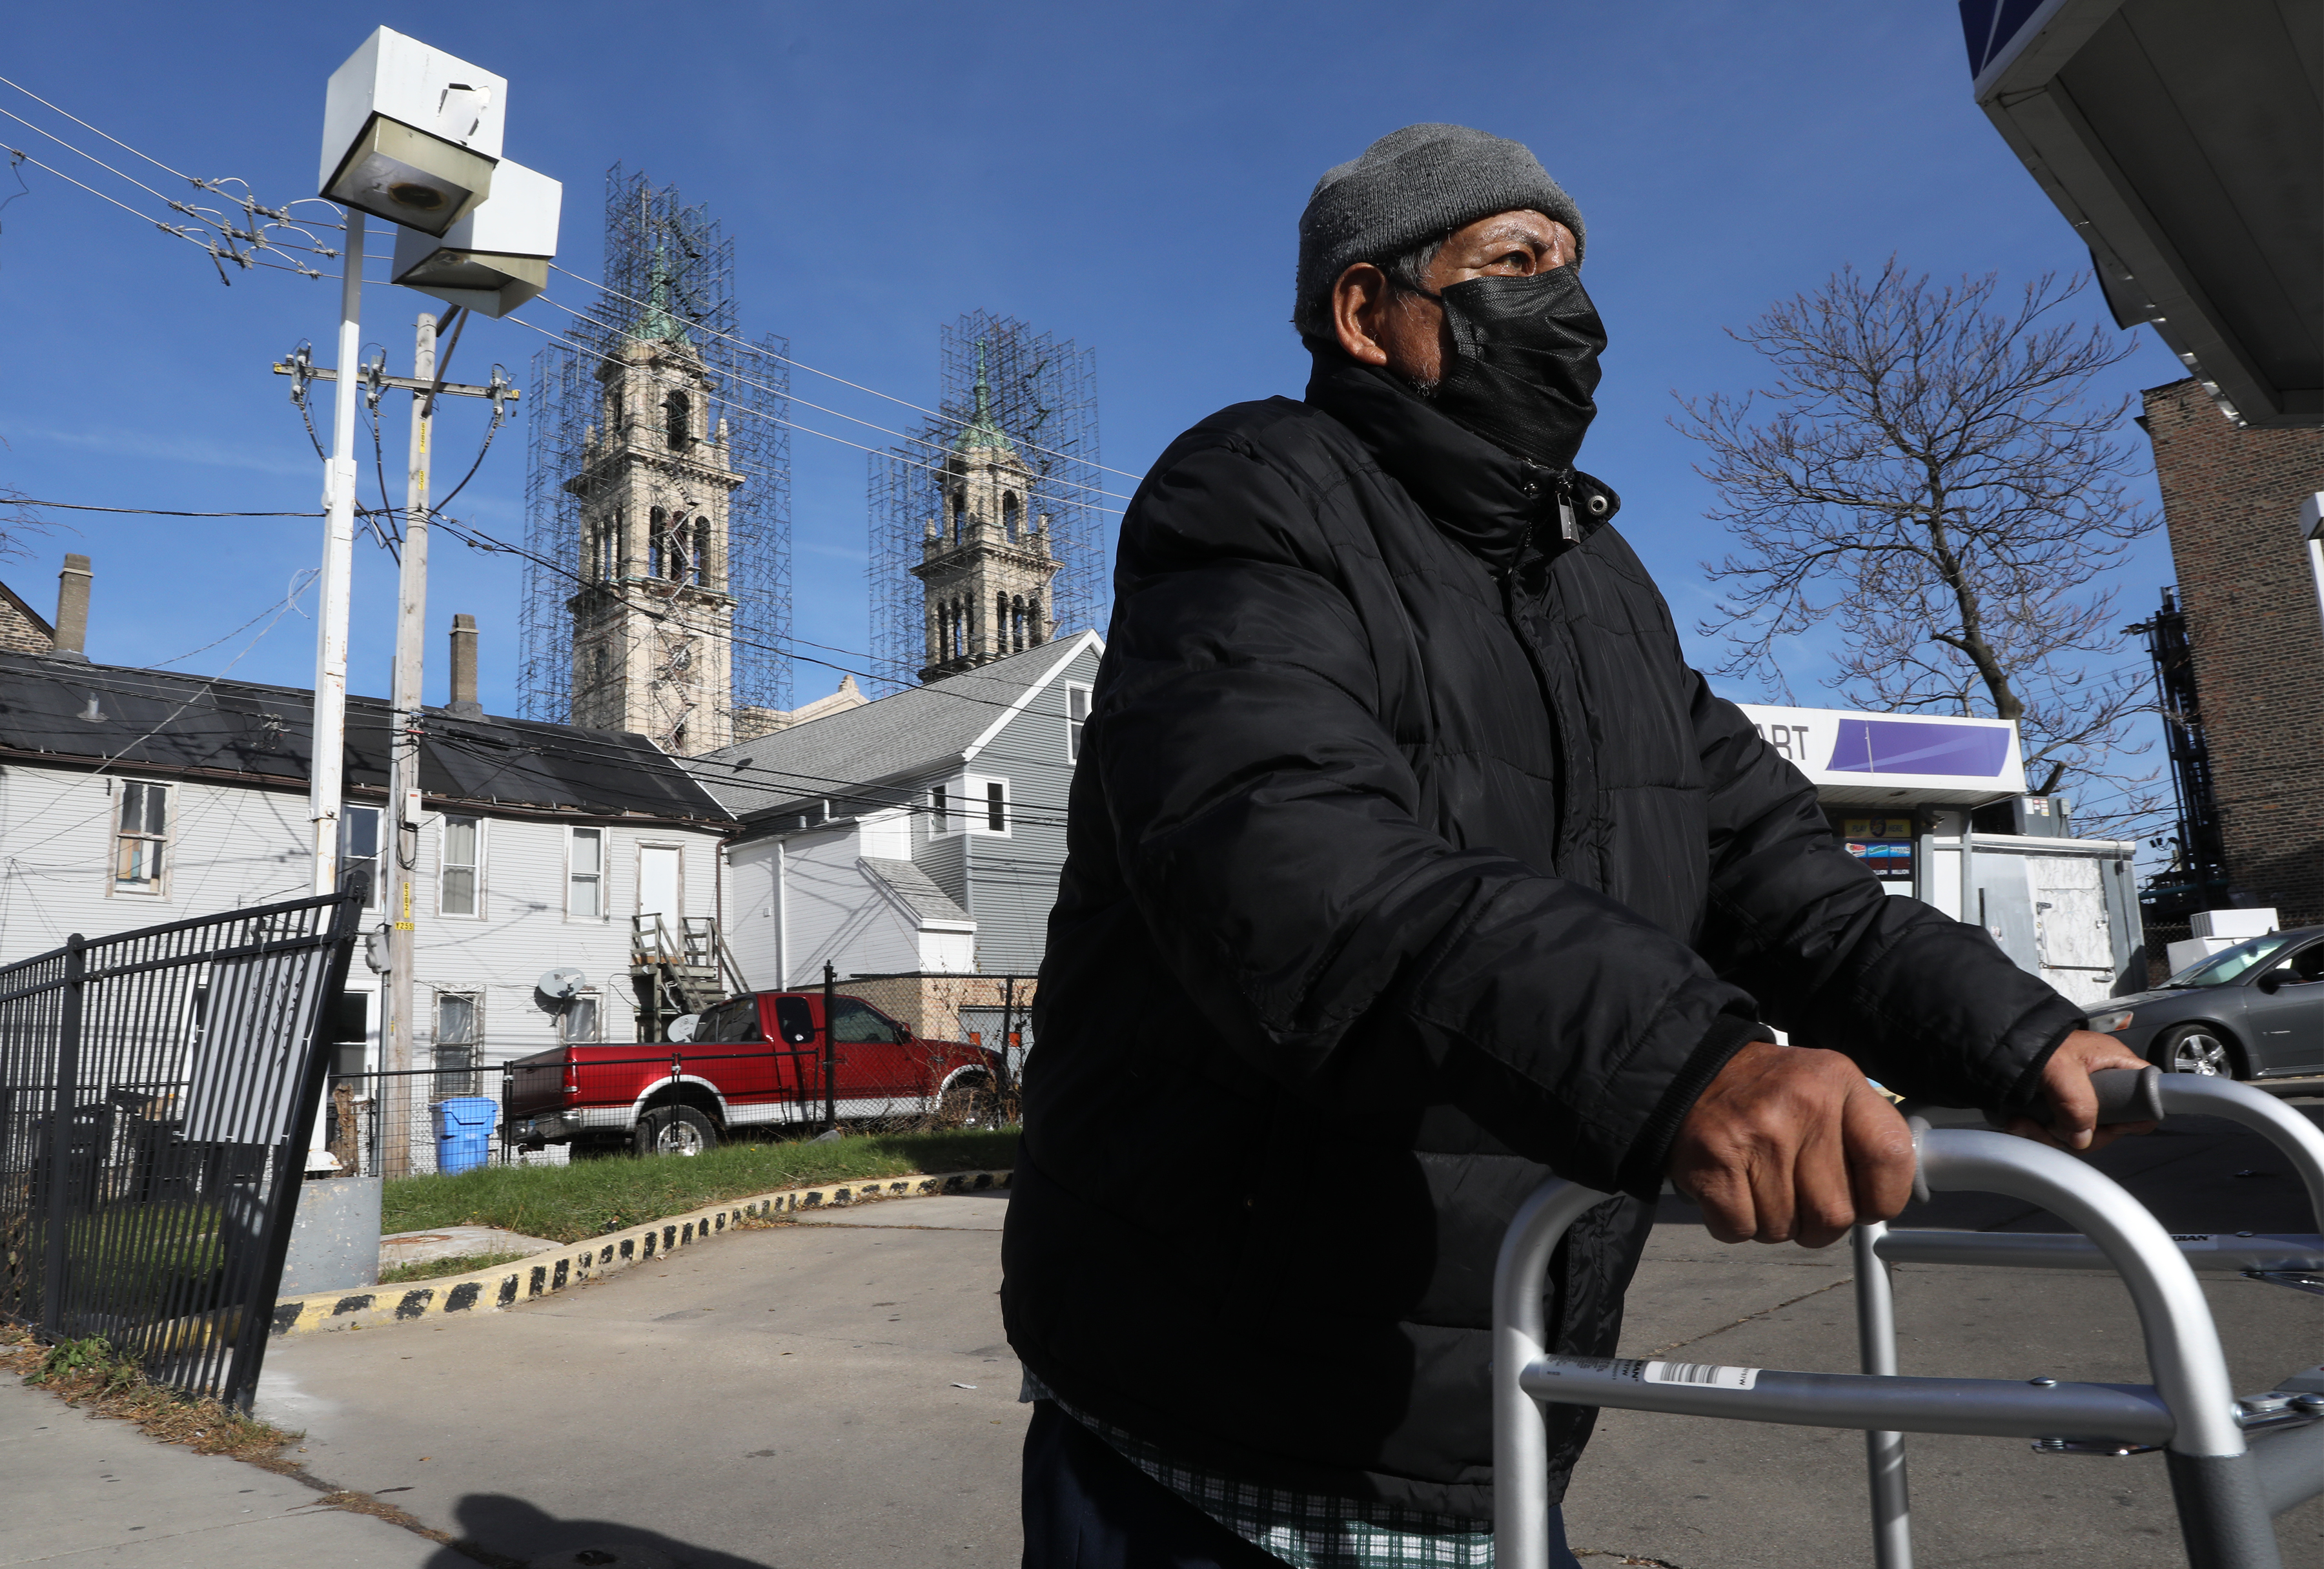 An elderly man holds a walker as he walks down the street. He's wearing a black winter coat and black face mask. Behind him are the steeples of a church against a clear blue sky.